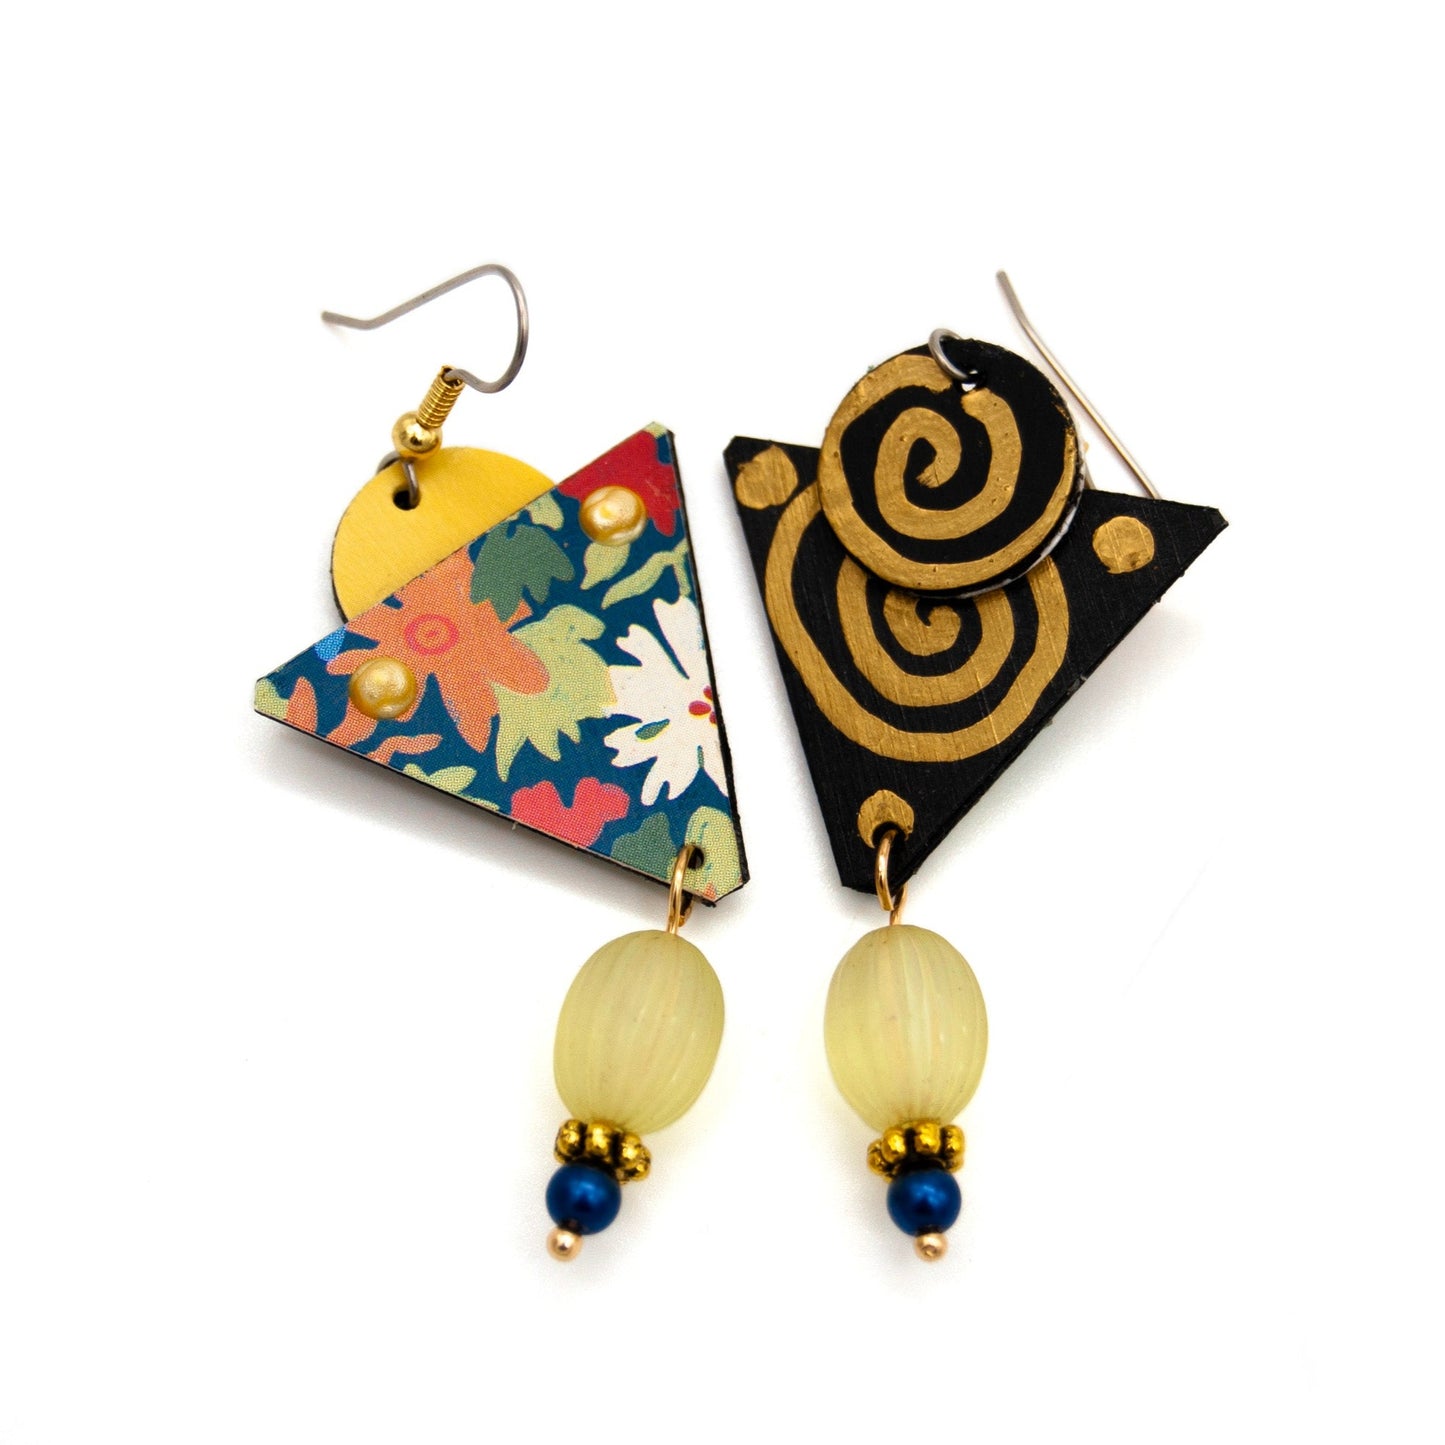 Paper Earrings with Floral Print